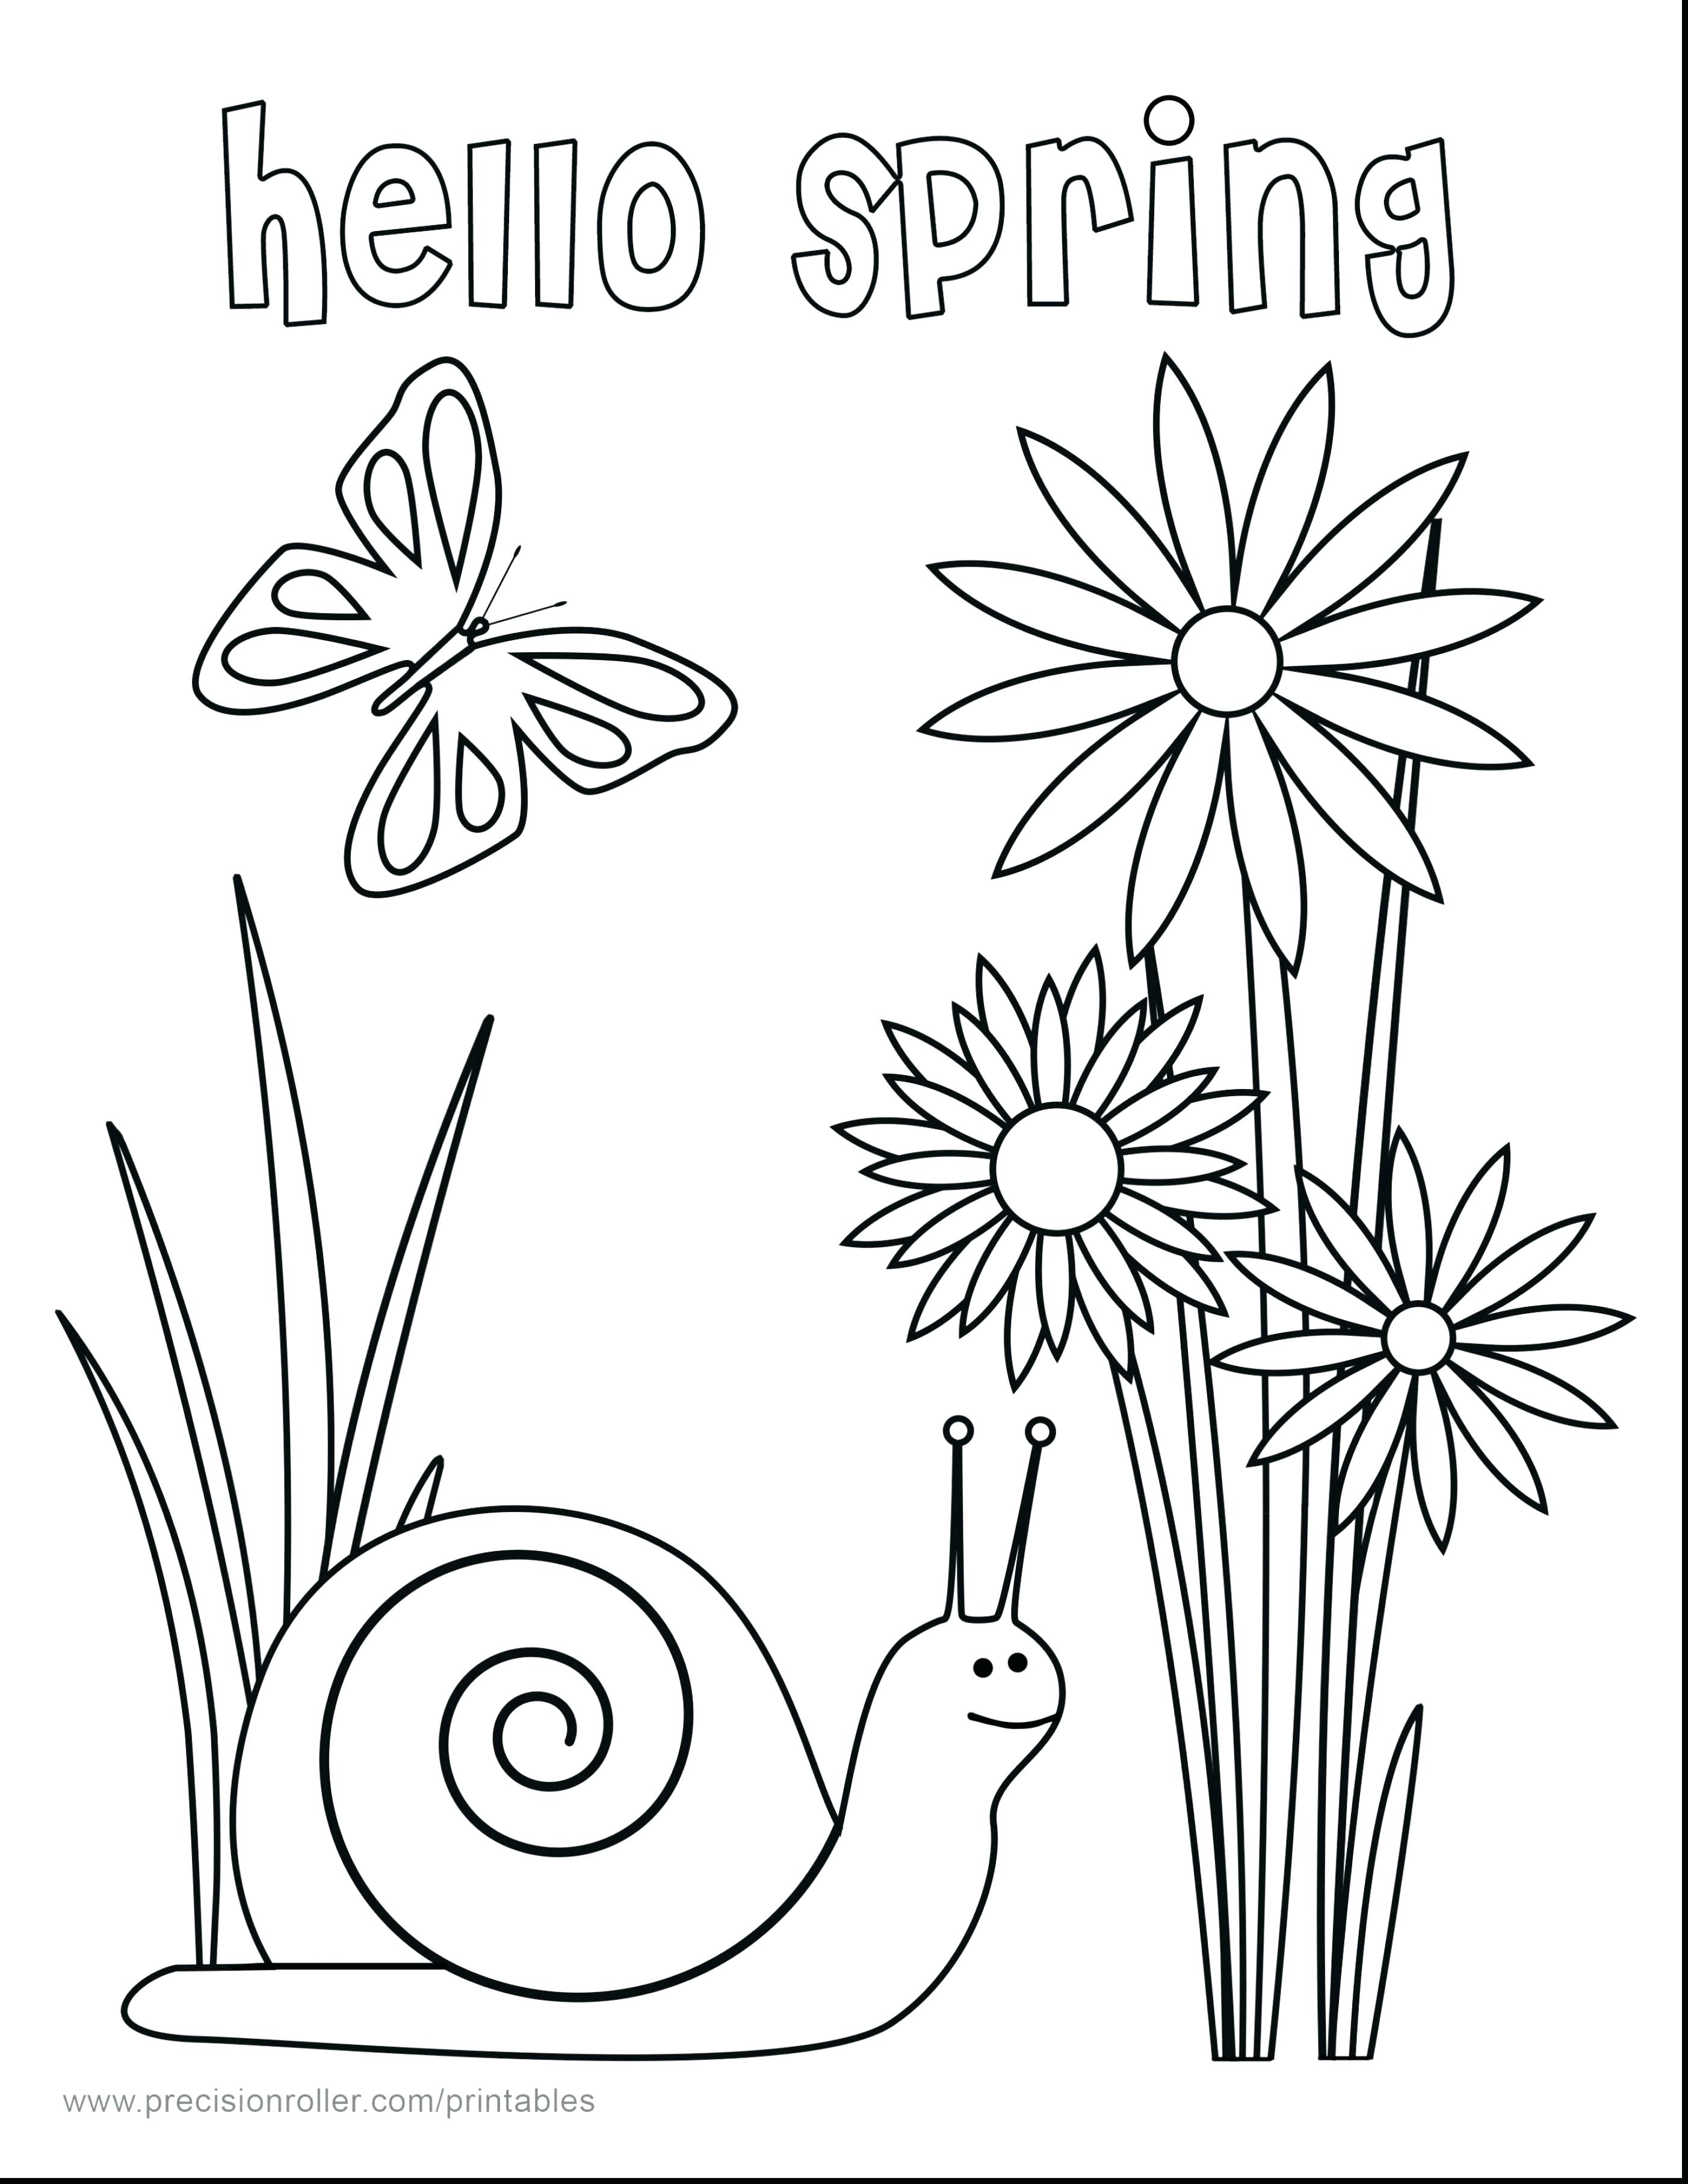 Spring Coloring Pages For Toddlers Spring Coloring Pages For Toddlers Shakeprintco